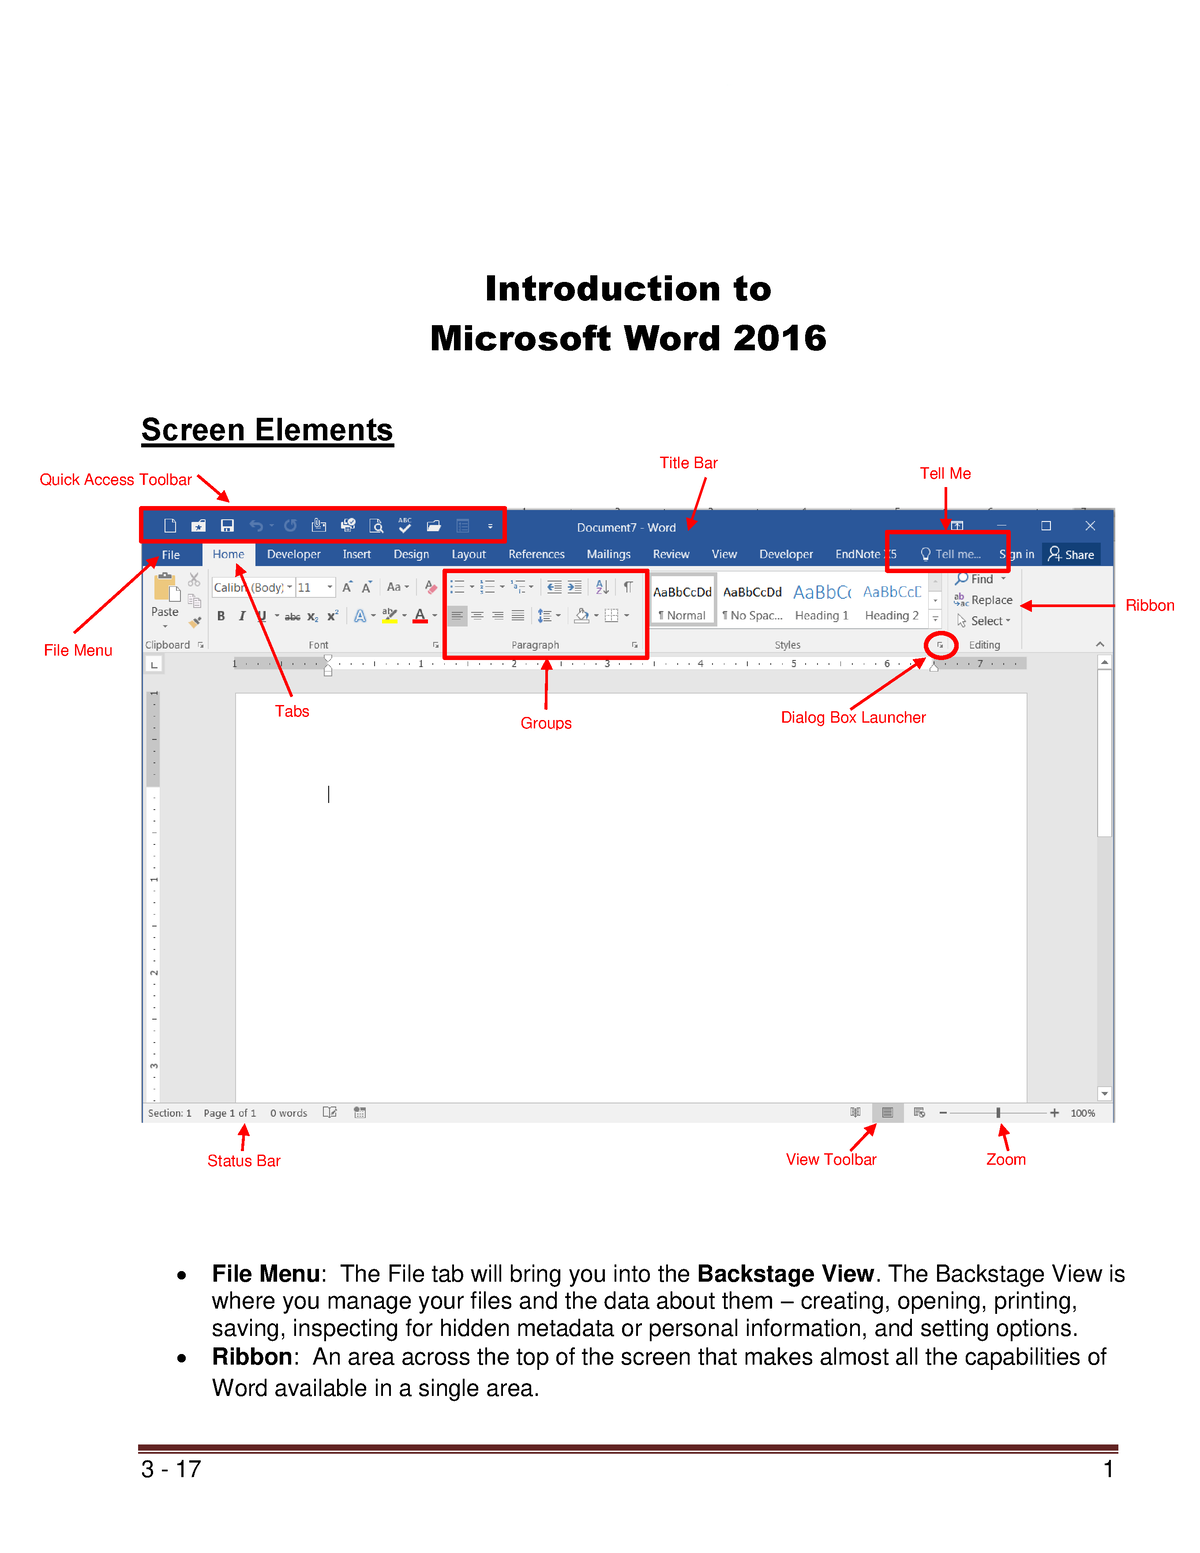 Introduction To Word 2016 3 17 1 Introduction To Microsoft Word 2016 Screen Elements File 6034